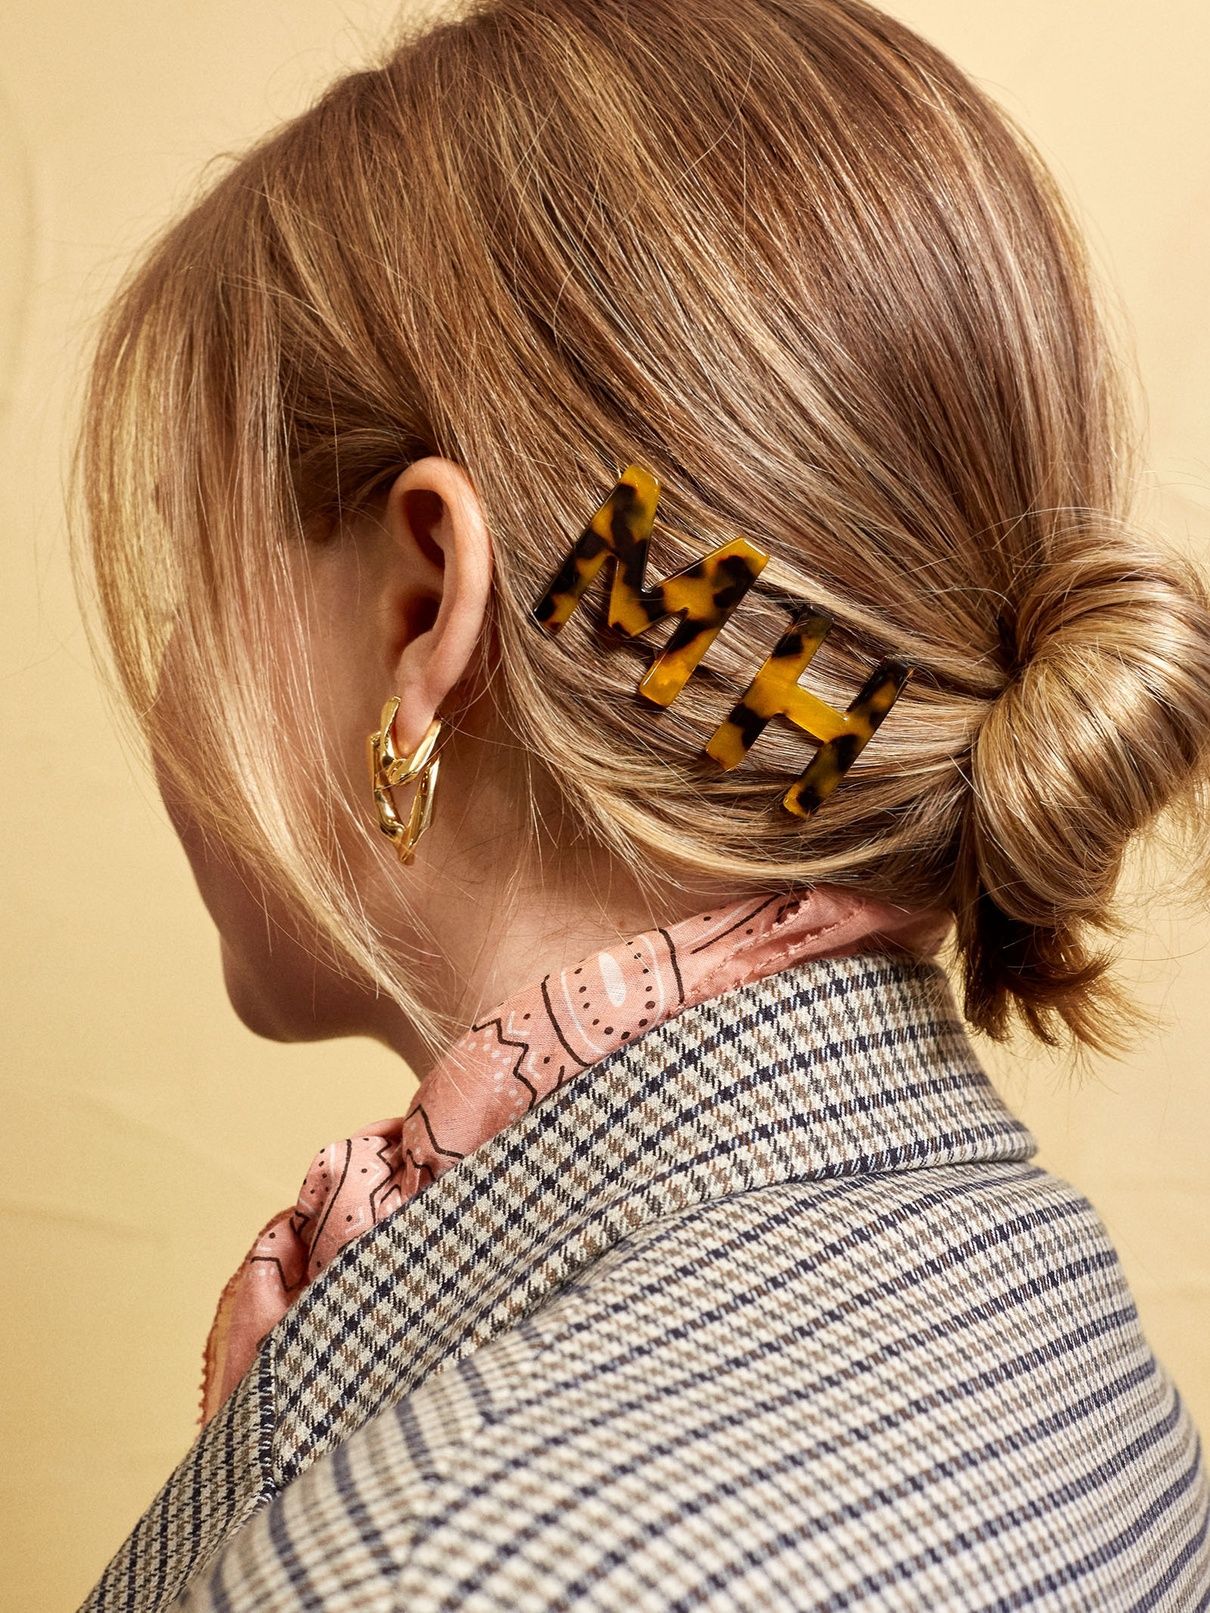 24 Best Hair Clips - Cute, Trendy Barrettes and Hair Accessories